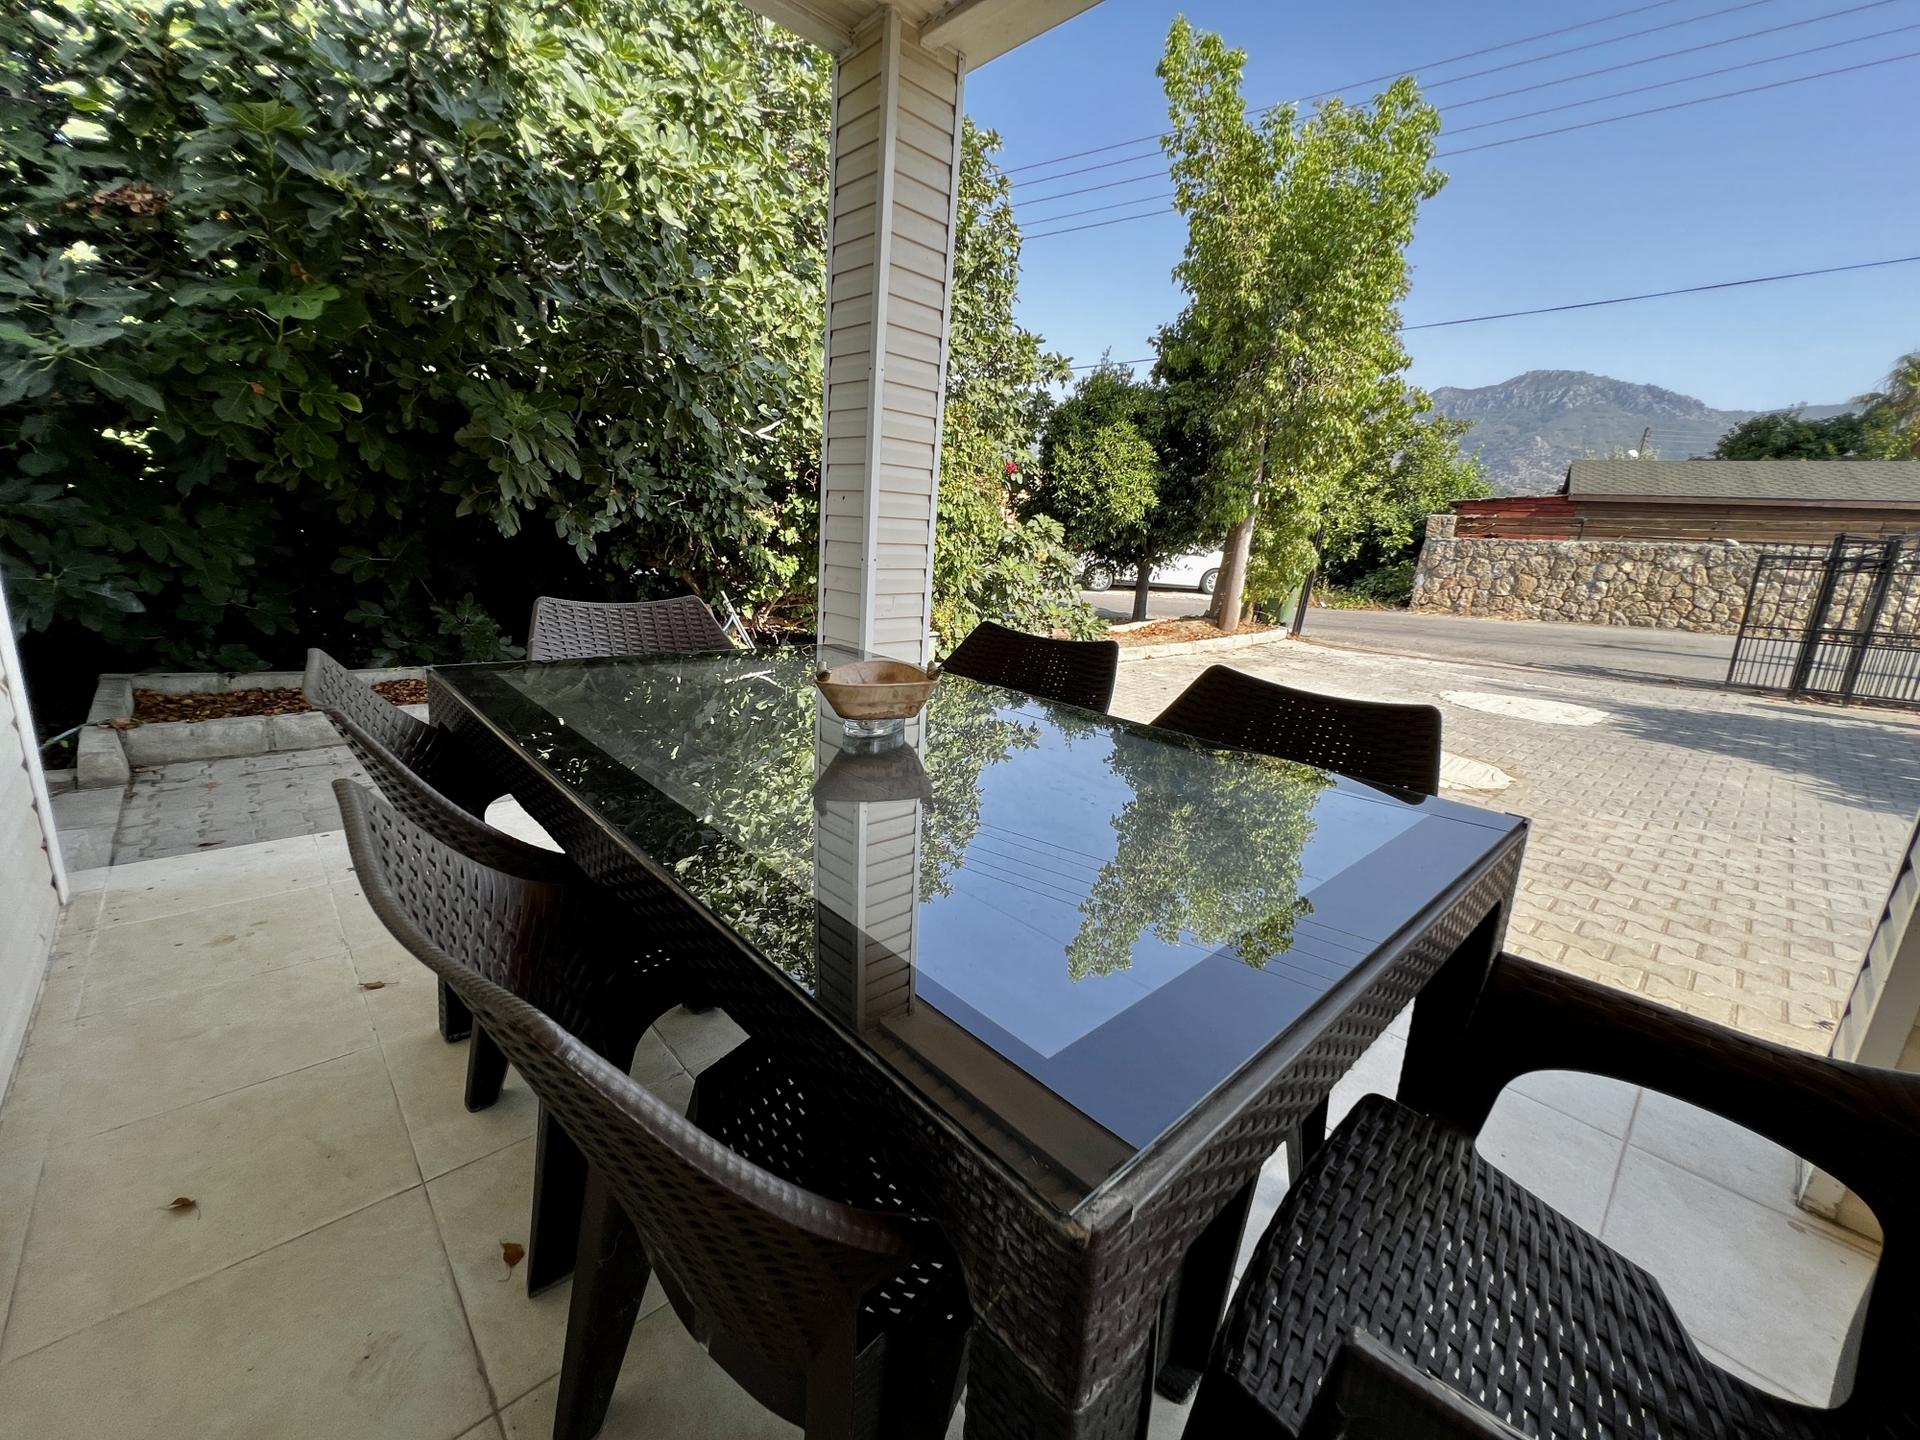 Indulge in outdoor dining and entertainment in our spacious and inviting garden.